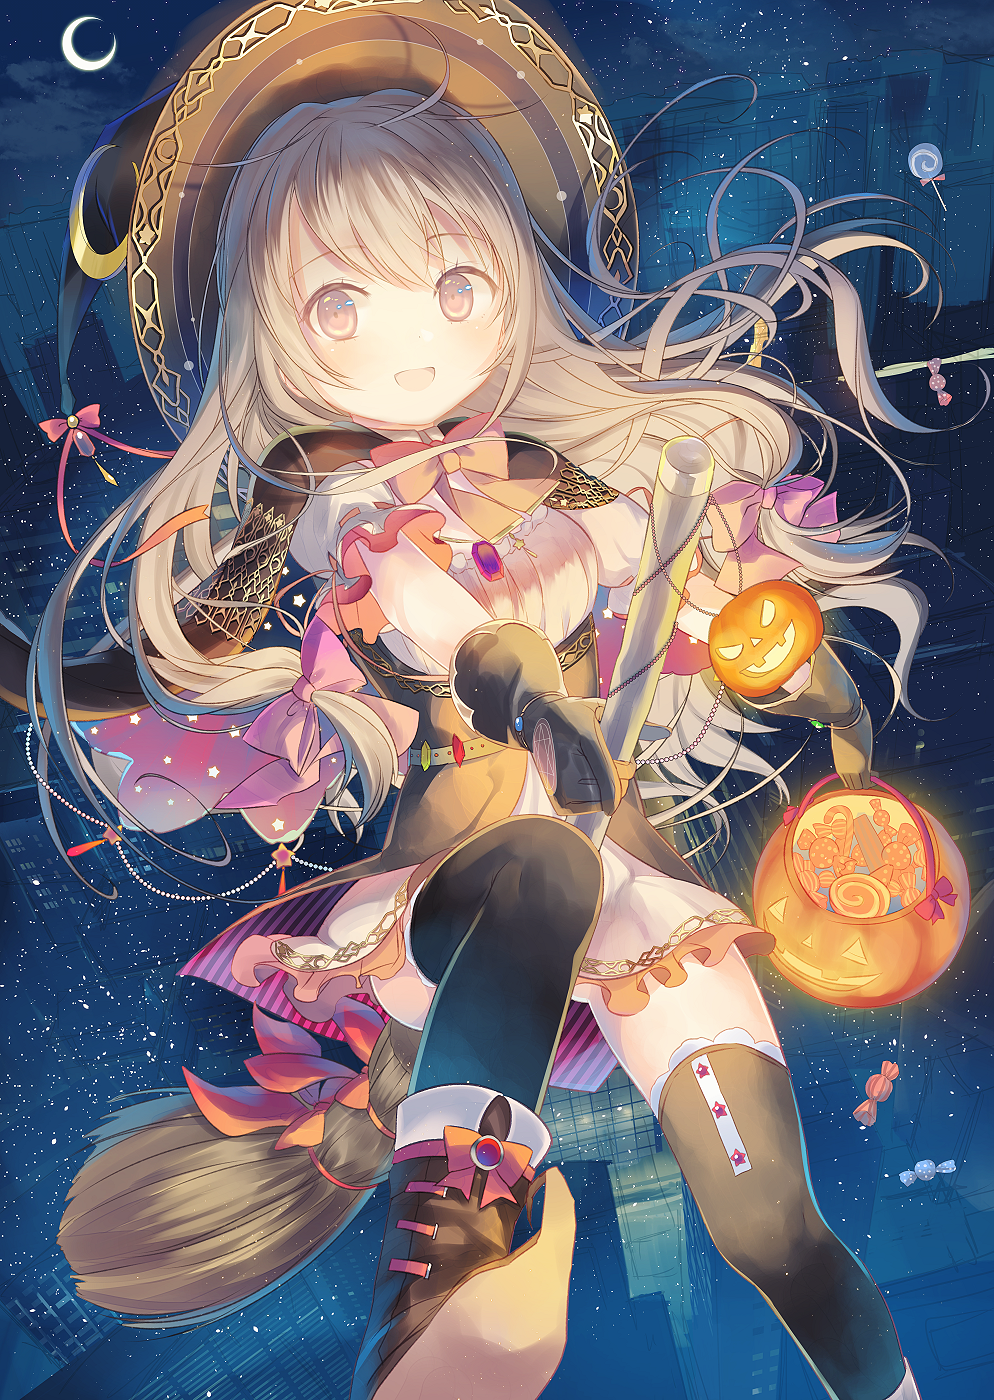 1girl :d black_gloves black_legwear blush boots bow broom broom_riding brown_eyes brown_hair candy cape copyright_request crescent crescent_moon dress gloves hair_bow halloween hat highres holding io_enishi jack-o'-lantern lollipop long_hair looking_at_viewer moon open_mouth outdoors outstretched_arms pentagram pink_bow pointing puffy_short_sleeves puffy_sleeves short_sleeves smile solo swirl_lollipop thigh-highs very_long_hair white_dress witch_hat wrapped_candy